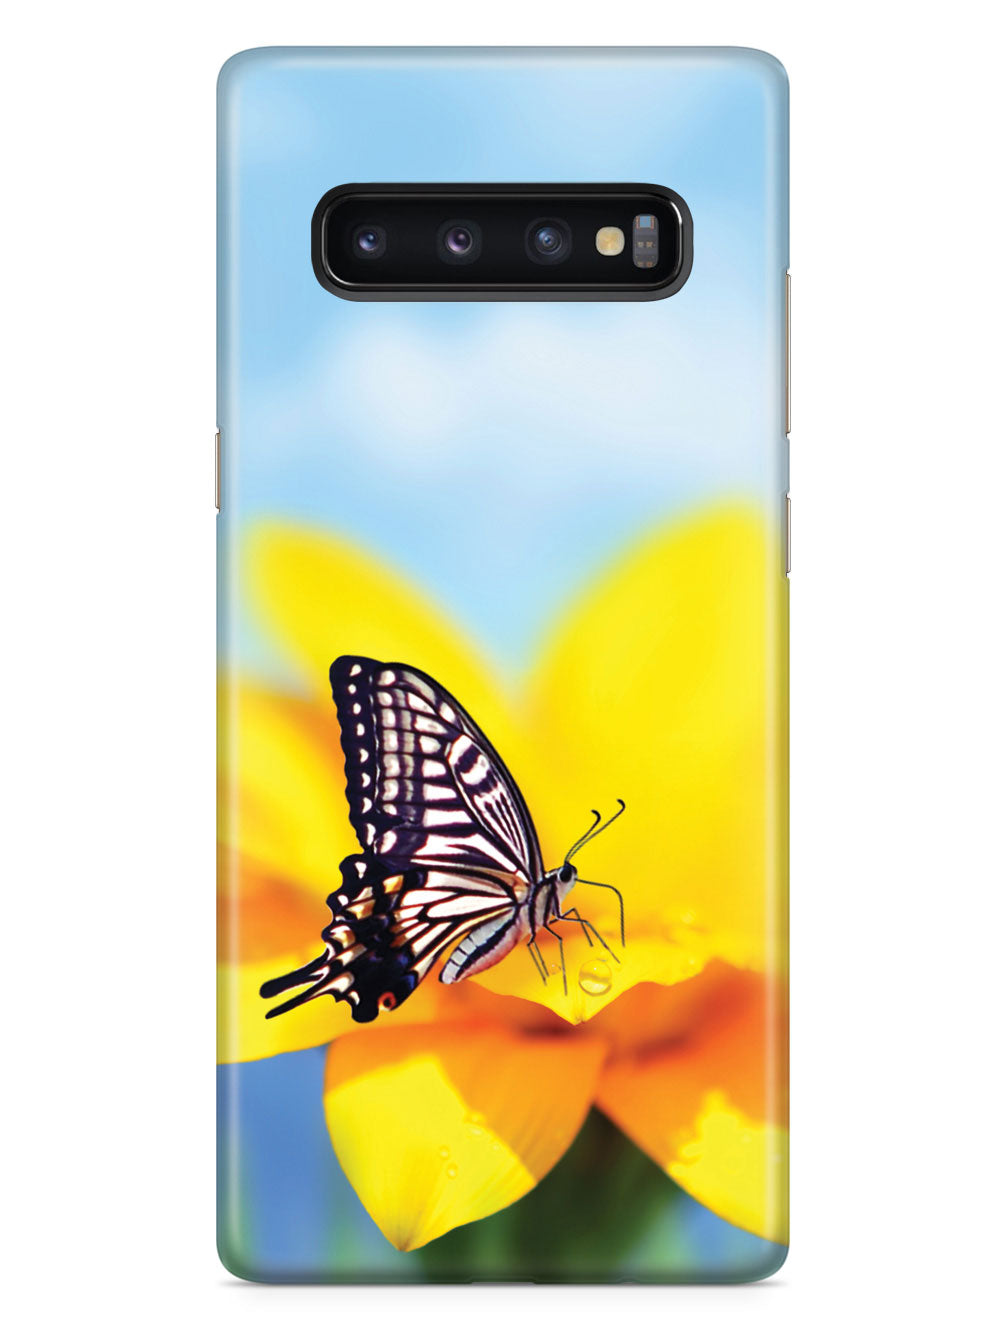 Monarch Butterfly on Yellow Flower - White Case